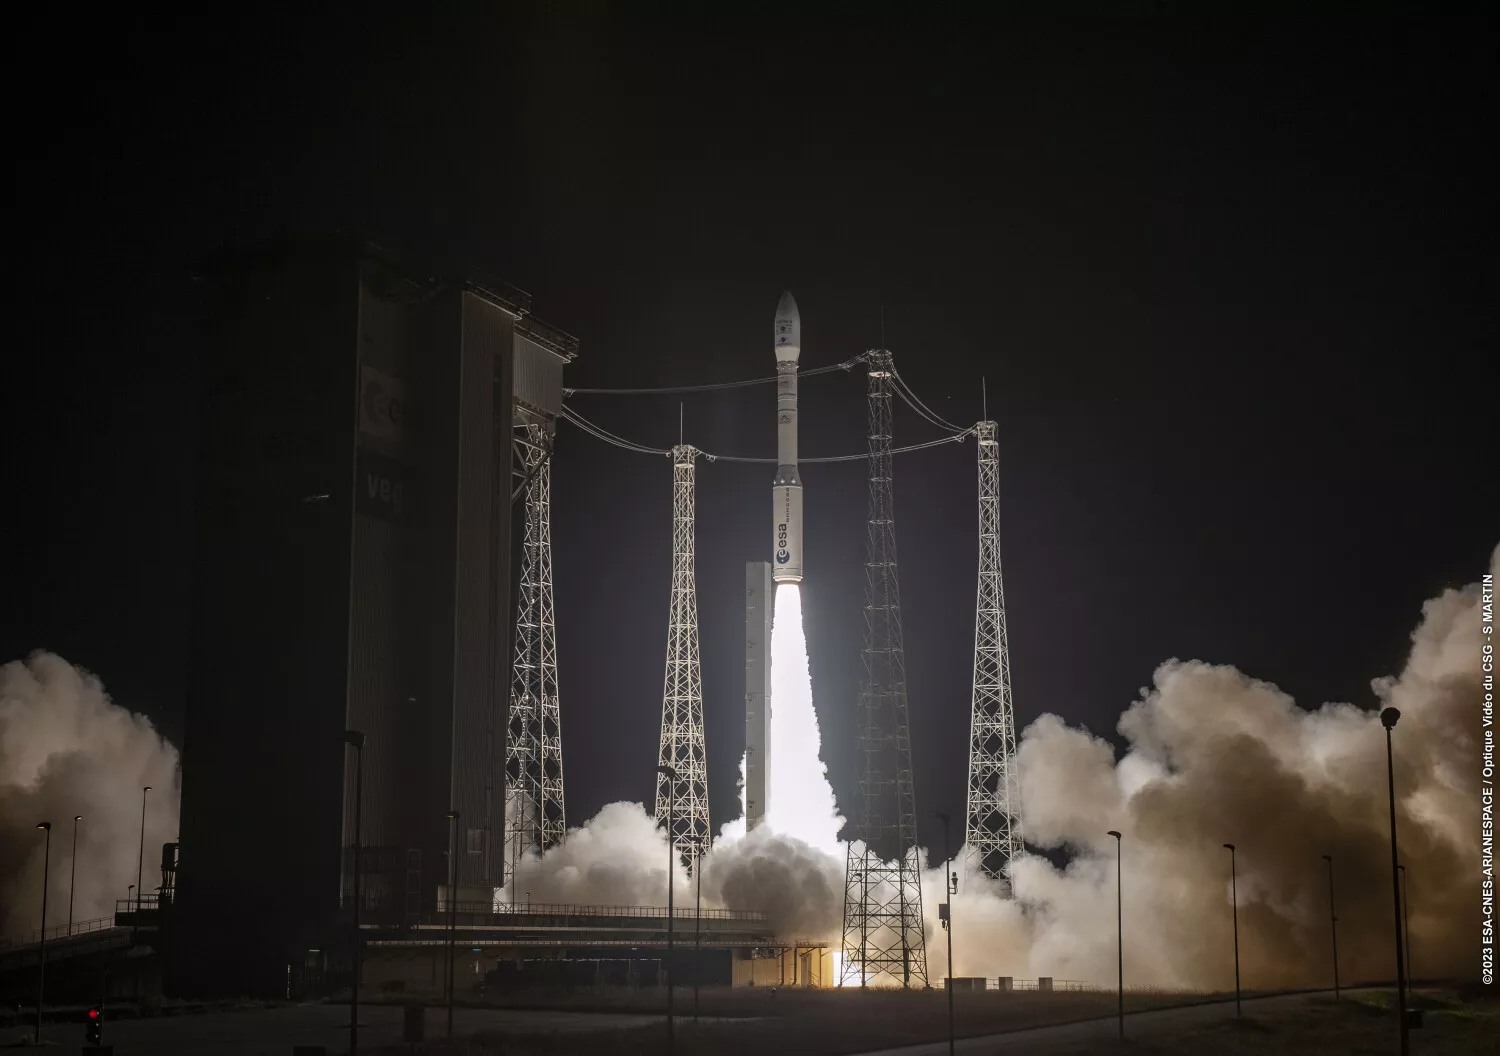 Arianespace’s Vega Rocket Takes Off After Delays